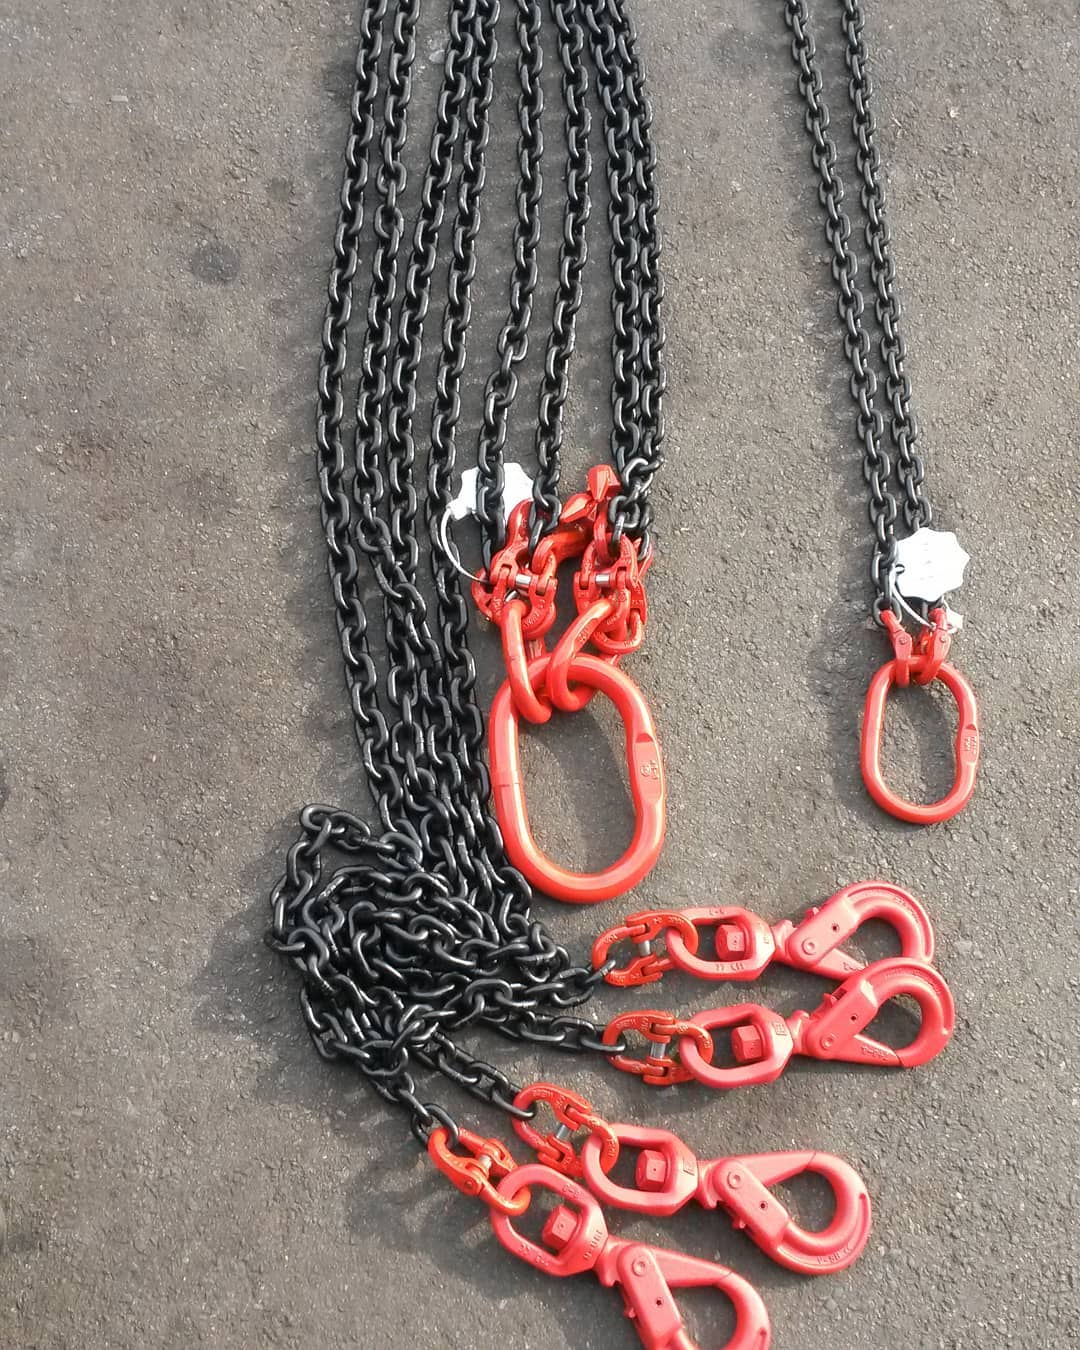 Heavy-duty Adjustable chain slings w/latch hooks for lifting-China Manfacturer